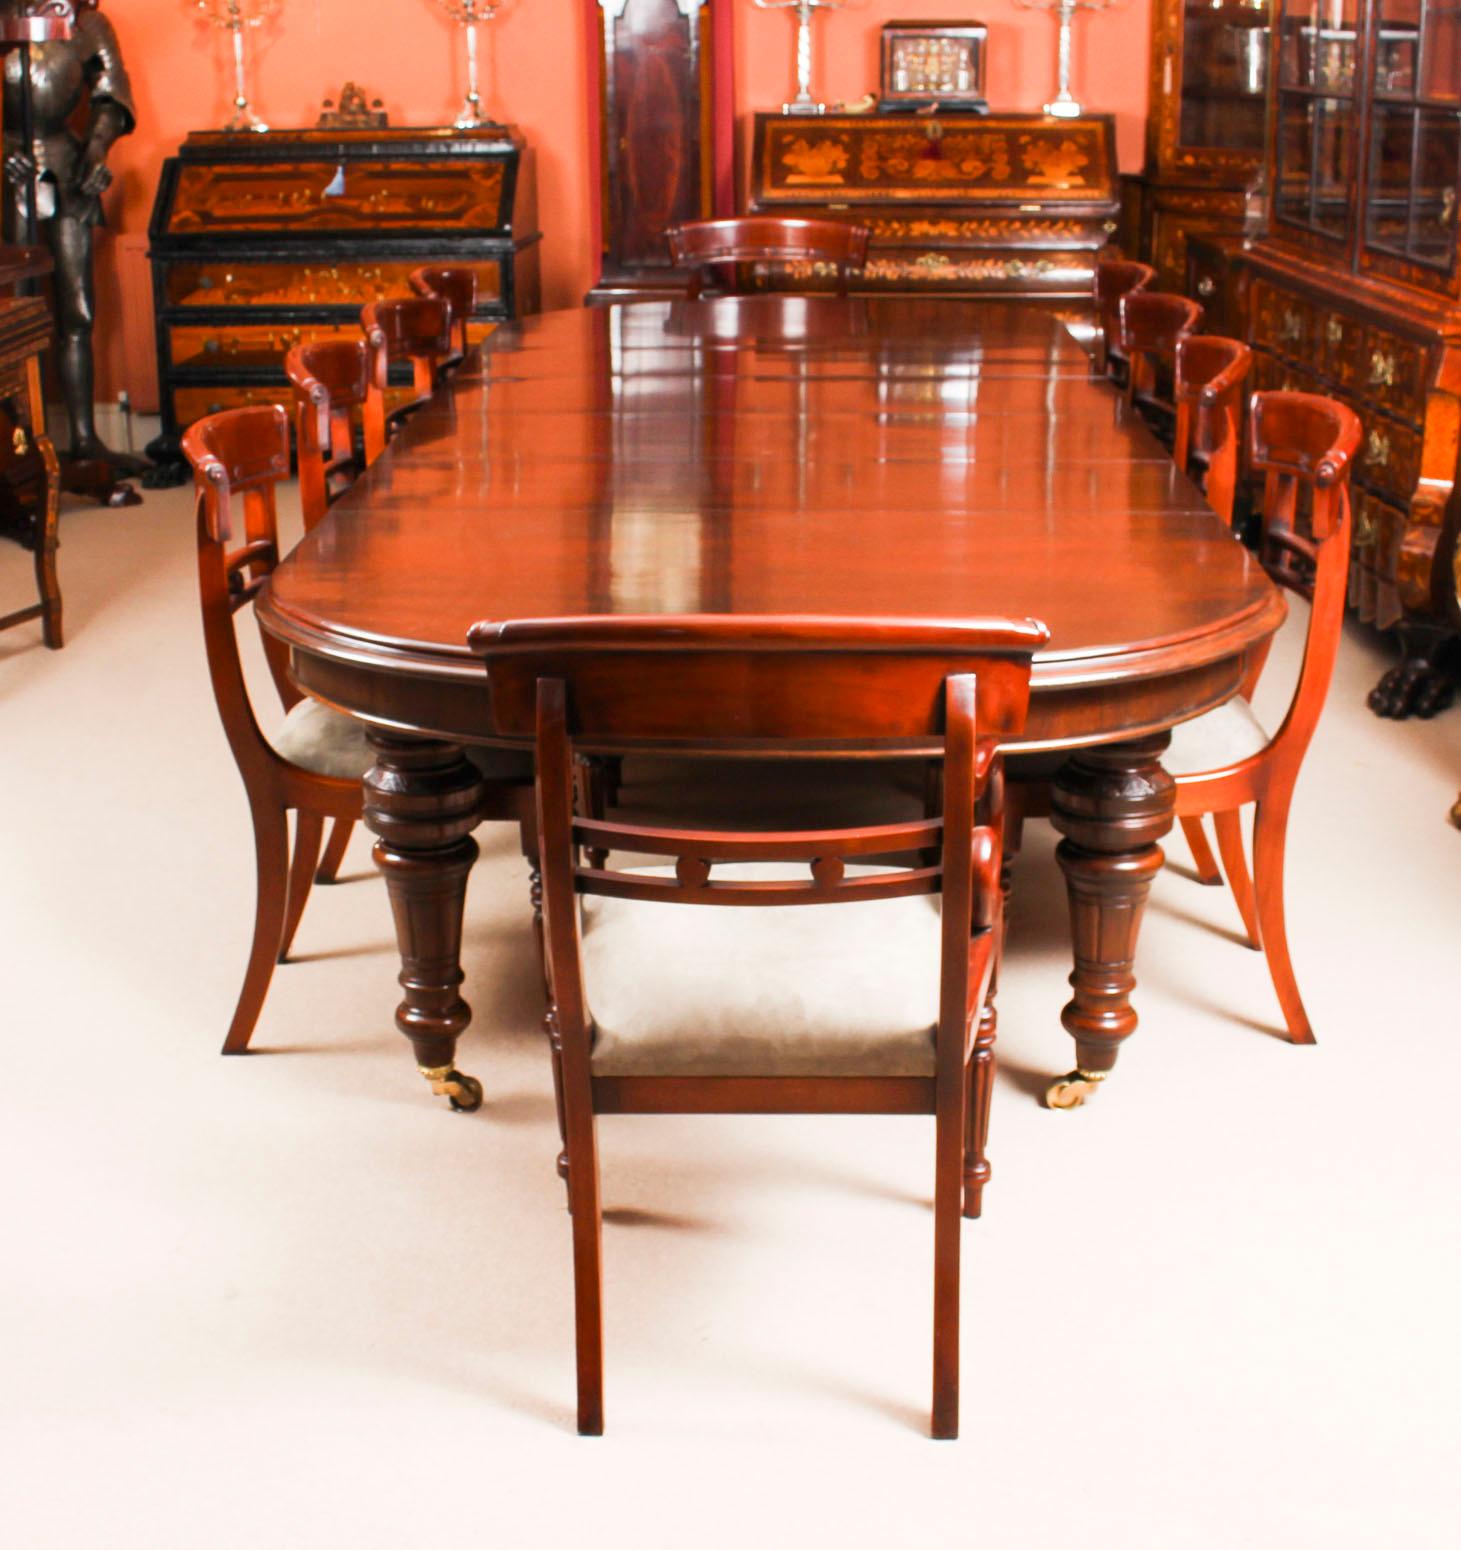 This is a magnificent dining set comprising an antique Victorian solid mahogany D-end dining table, circa 1870 in date, with a set of ten bespoke upholstered back dining chairs.
 
The beautiful table is in stunning flame mahogany and has four leaves